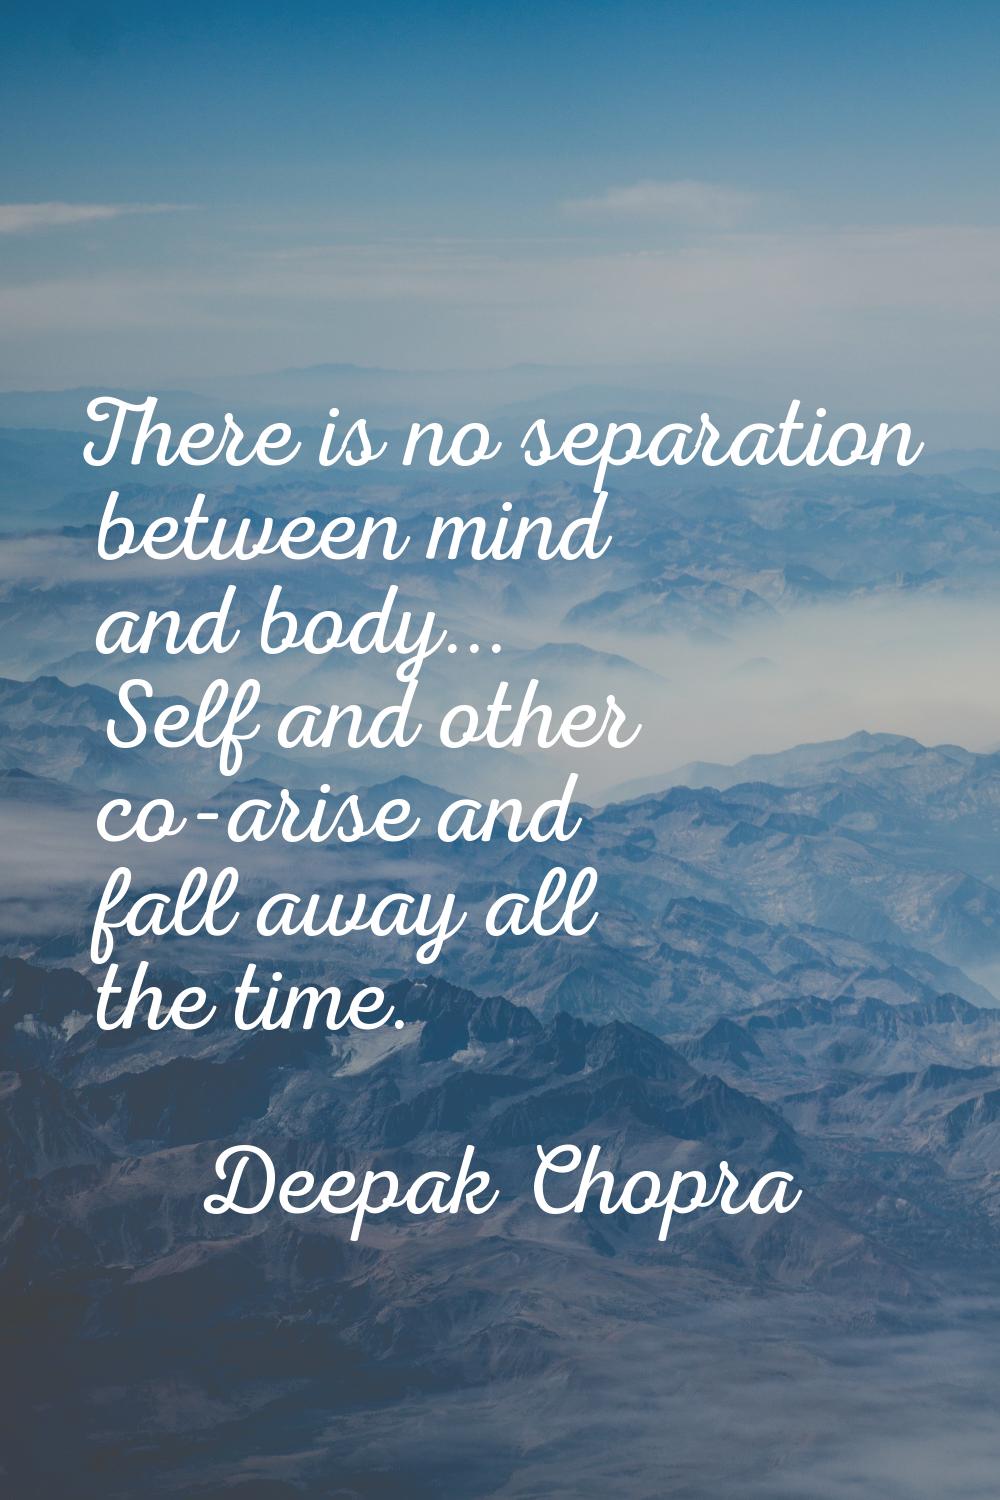 There is no separation between mind and body... Self and other co-arise and fall away all the time.